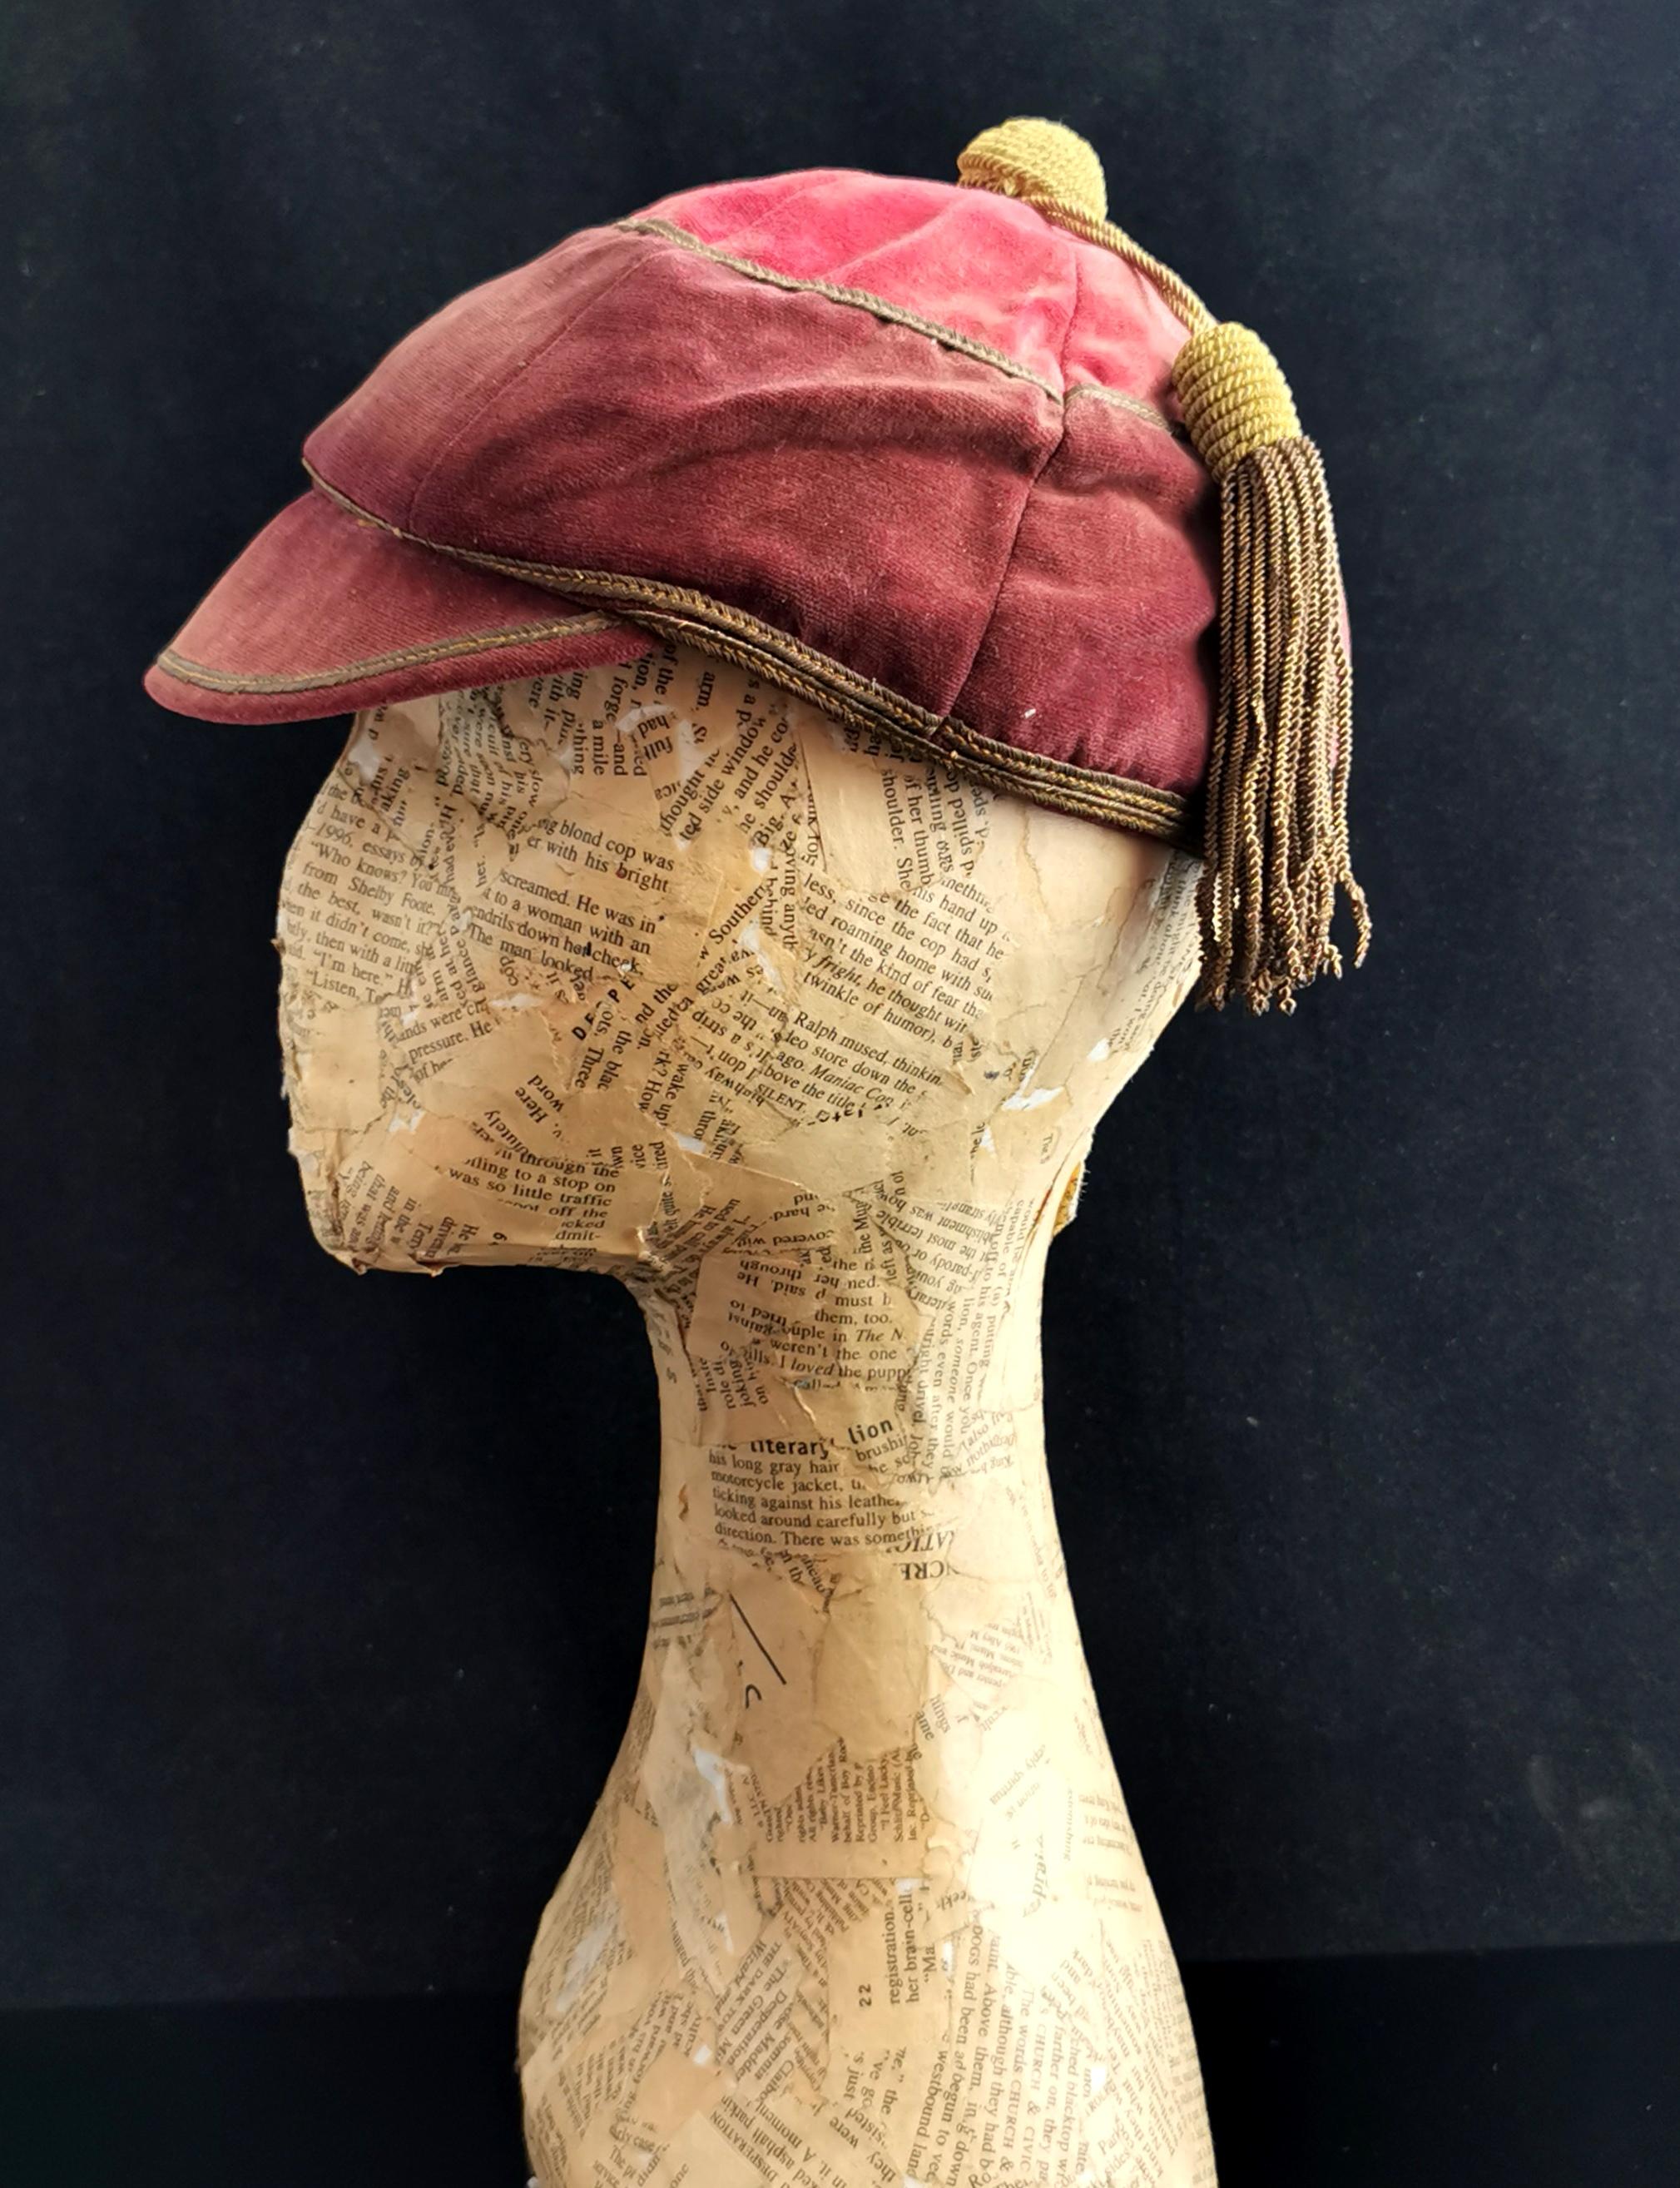 A rare antique sporting cap or jockeys cap.

This gorgeous and scarce piece is not only a piece of fashion history but also a fantastic sporting relic.

It is made from red and gold velvet with a satin lining.

The cap is piped in gold metal thread